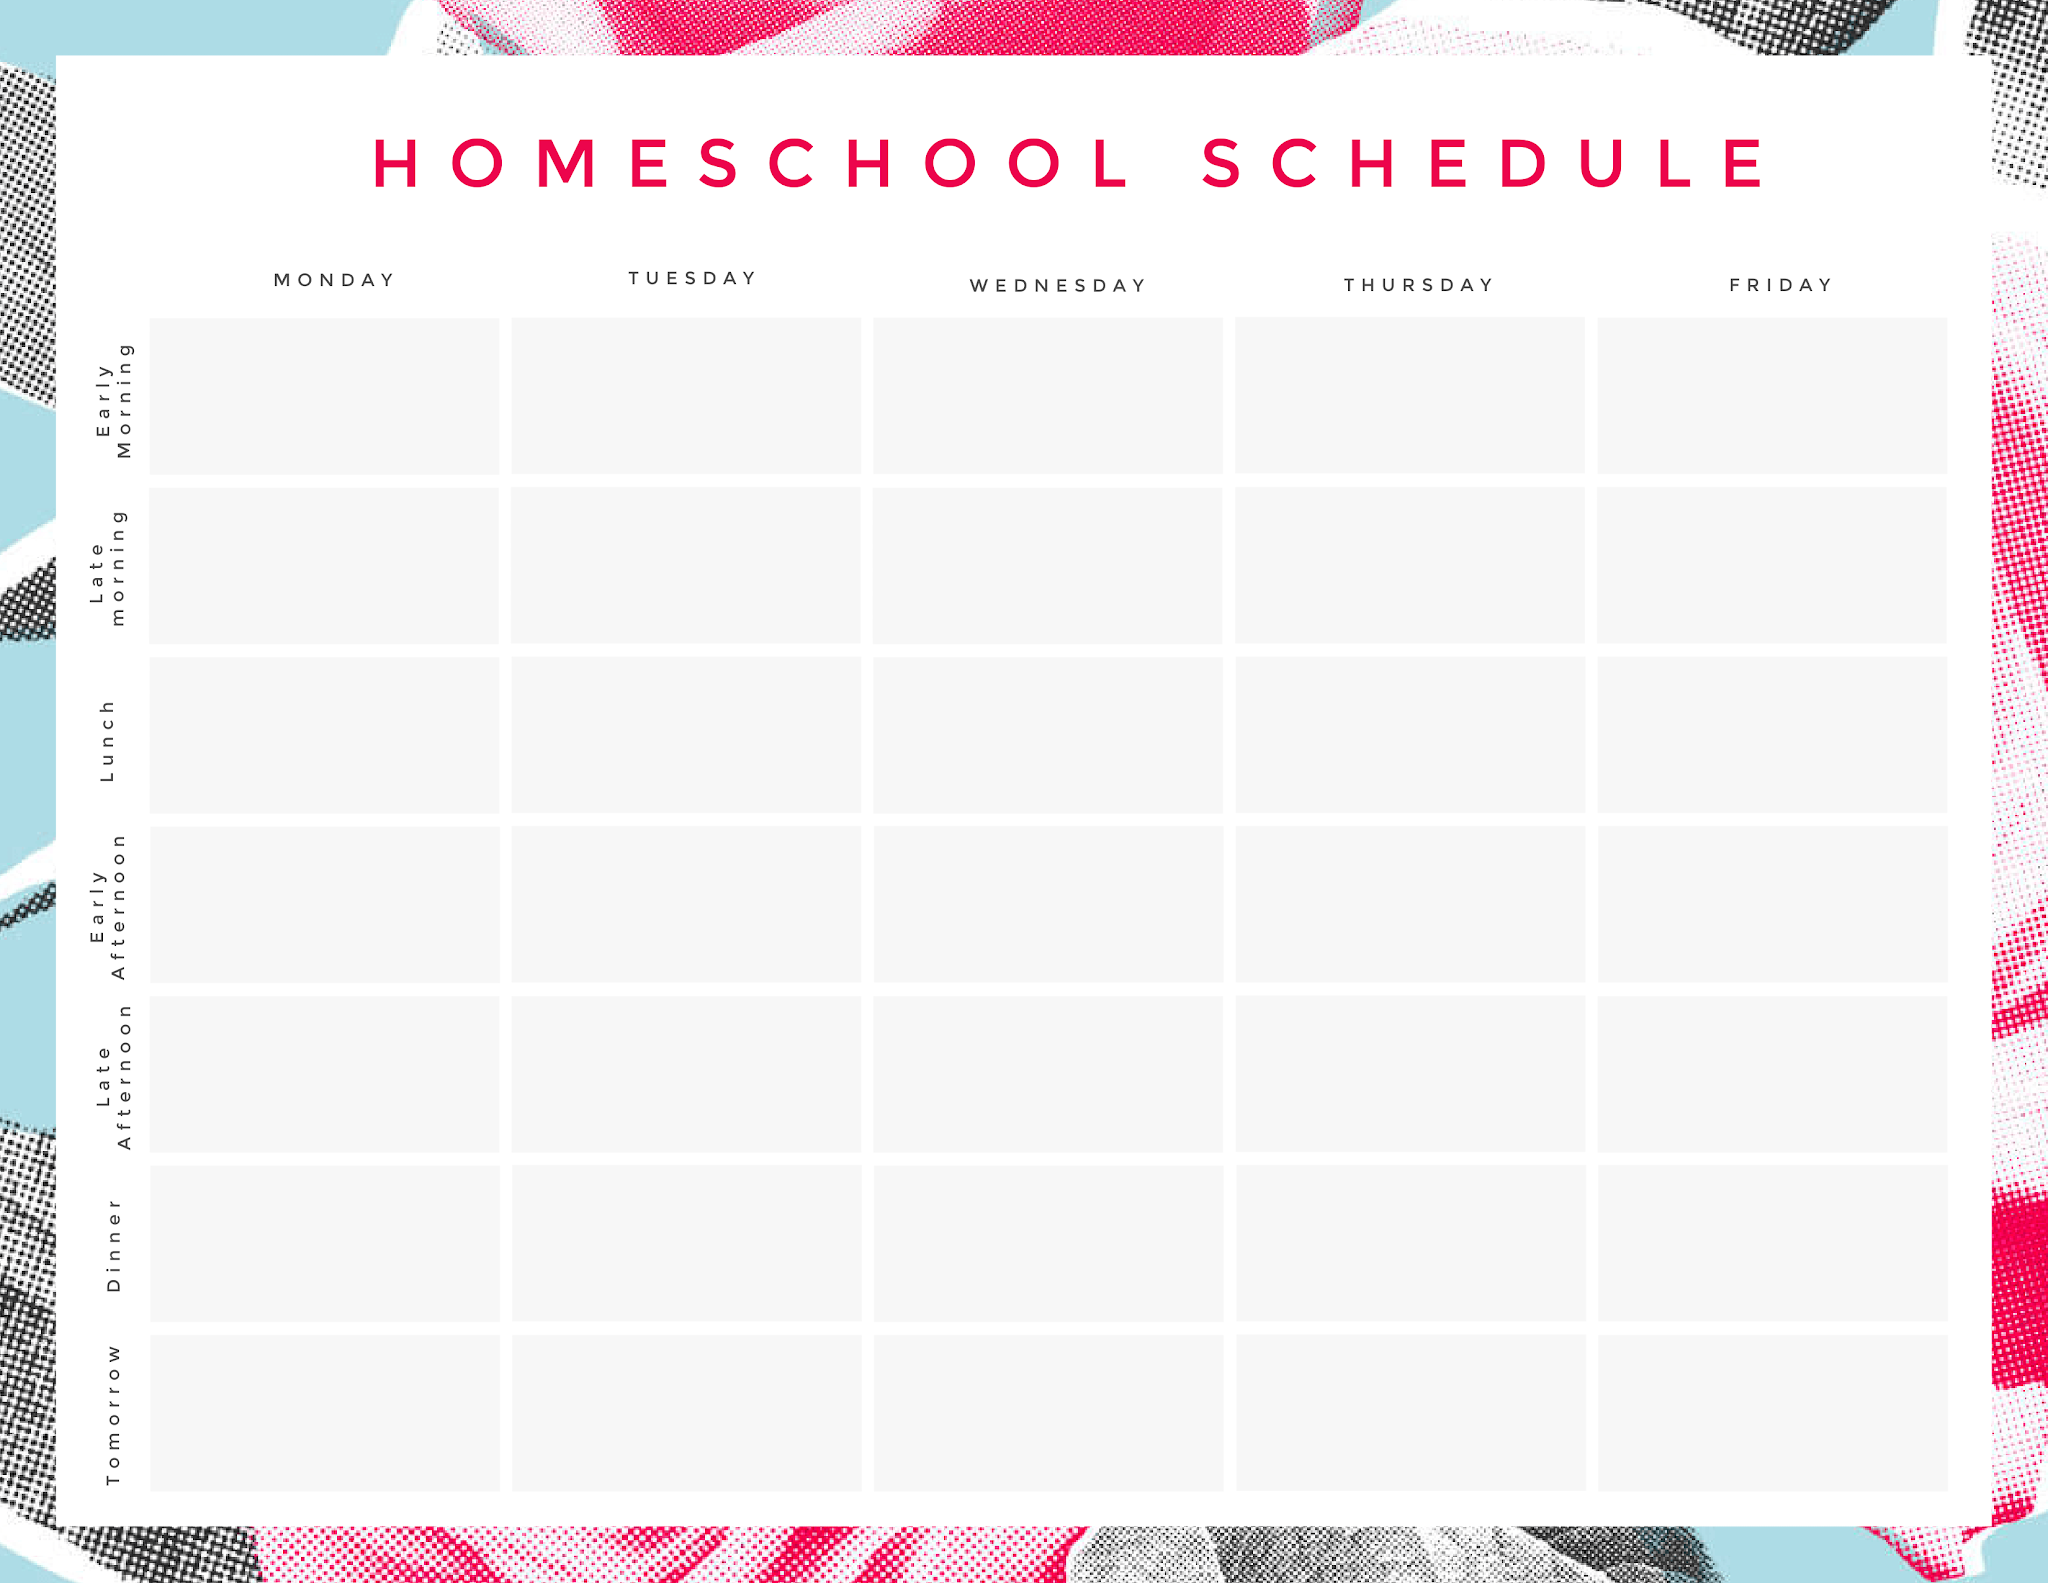 homeschool-schedule-ideas-free-homeschool-planner-printables-the-daily-connoisseur